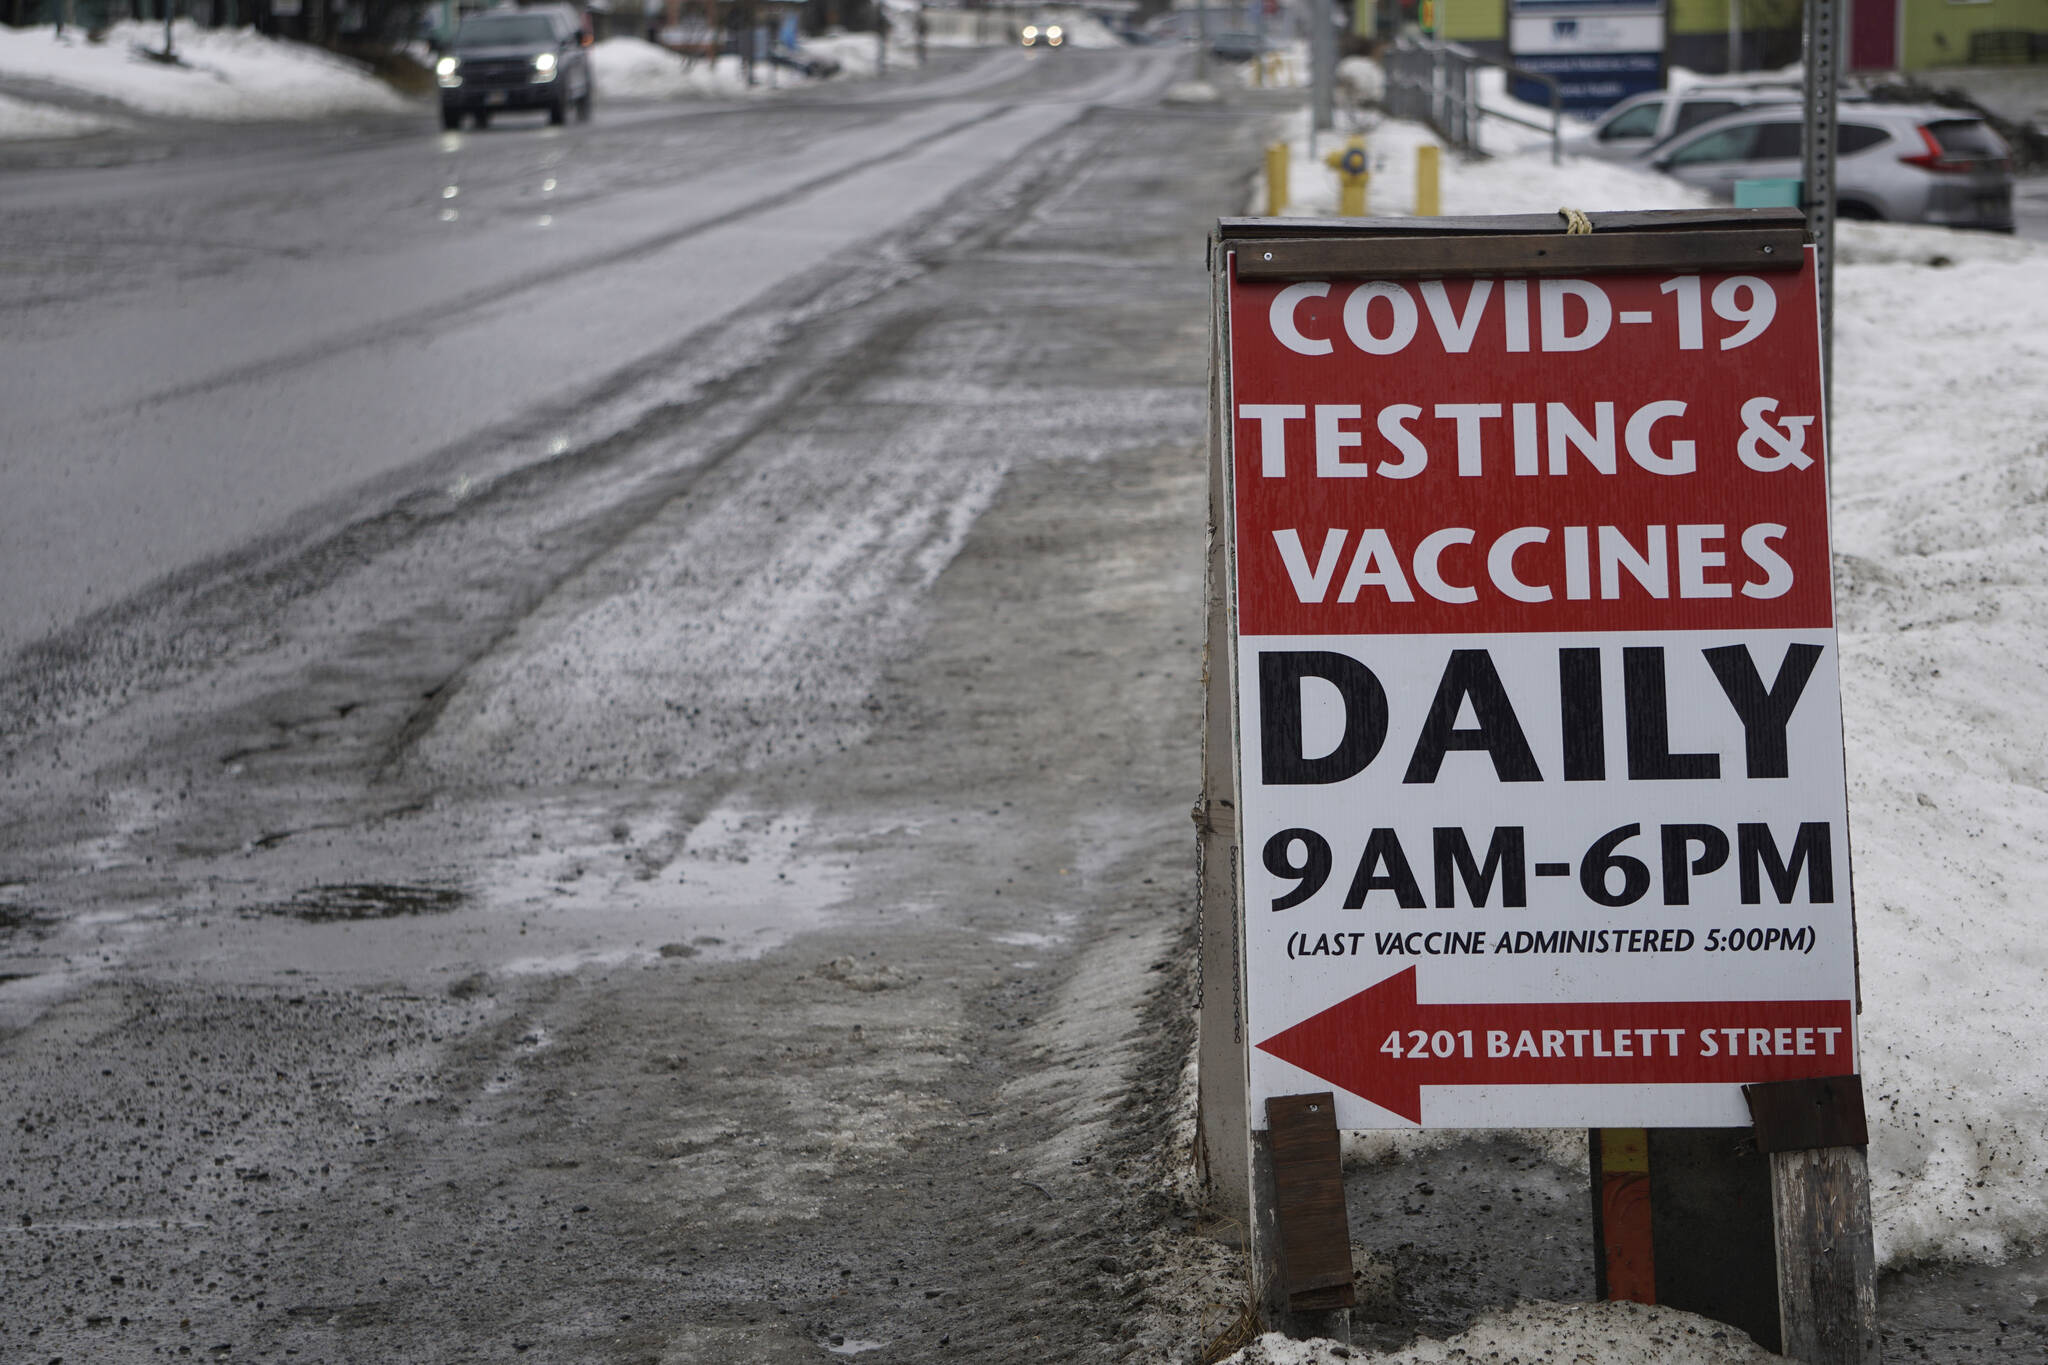 A sign at the corner of Pioneer Avenue and Bartlett Street points the way to the South Peninsula Hospital COVID-19 testing and vaccine clinic on Bartlett Street on Feb. 17, 2021, in Homer, Alaska. (Photo by Michael Armstrong/Homer News)